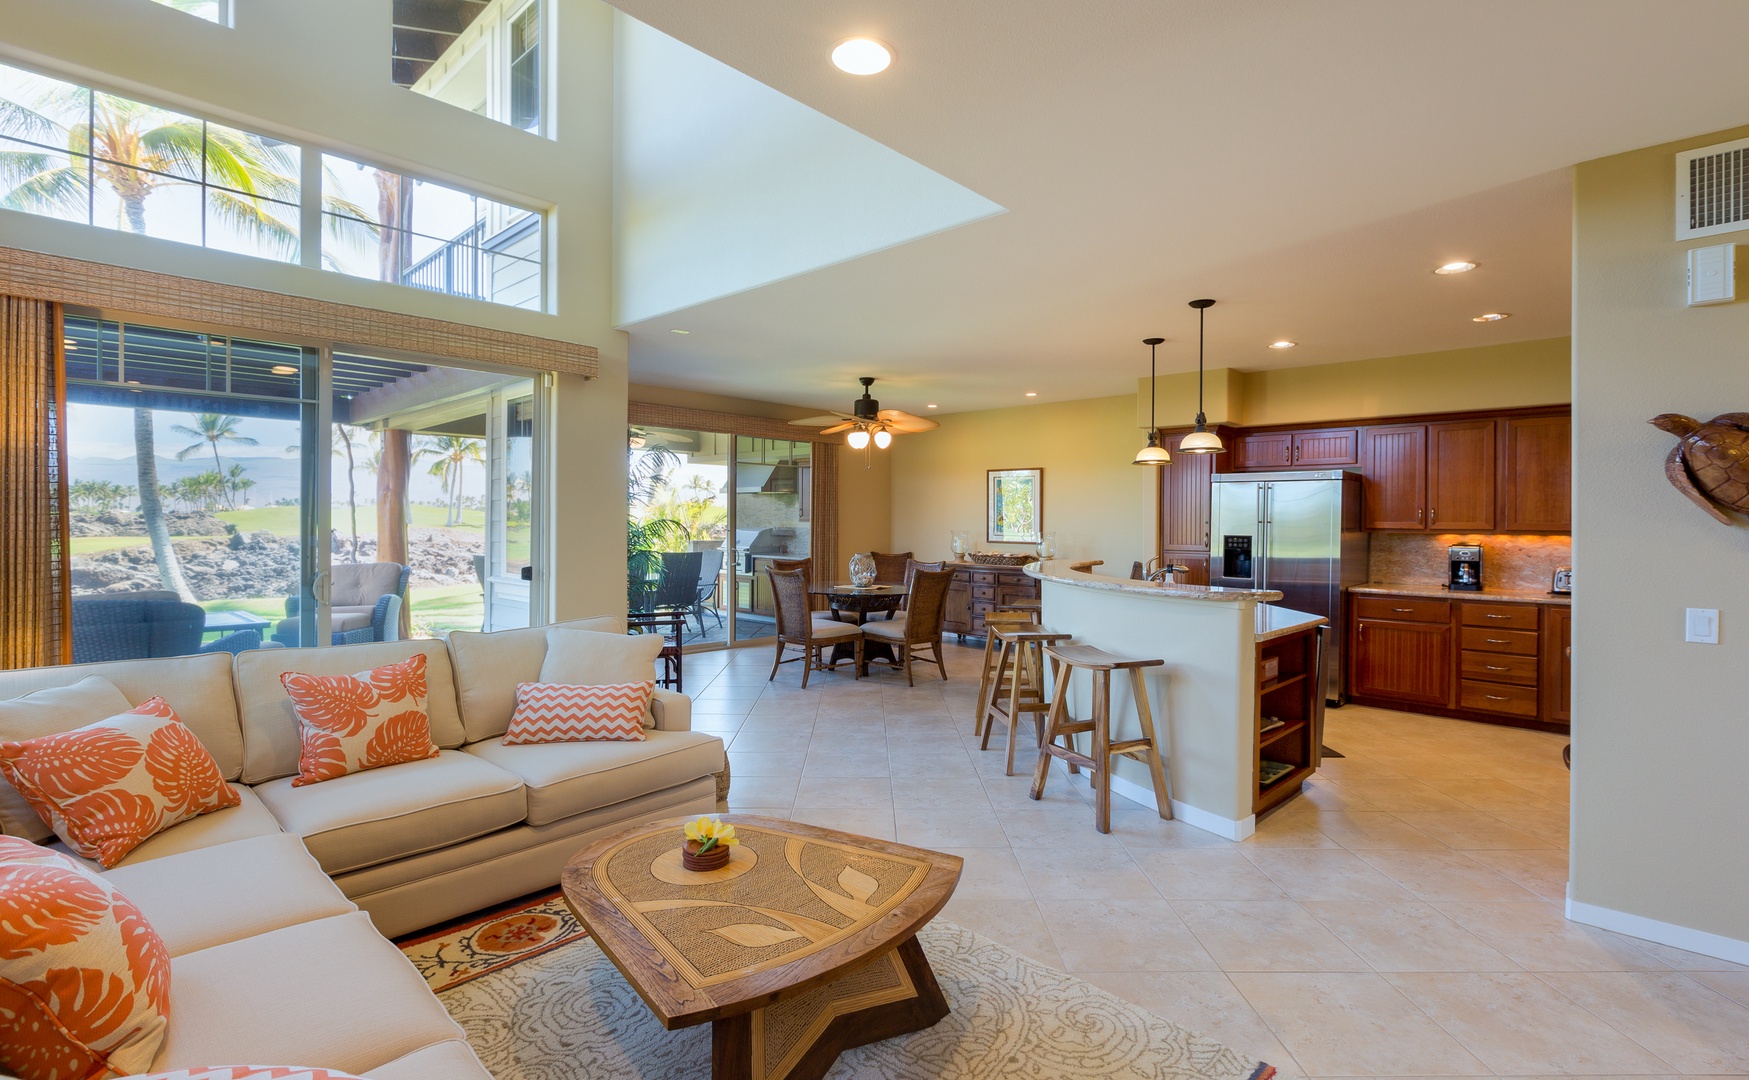 Kamuela Vacation Rentals, Mauna Lani Golf Villas C1 - Villa C1's open-concept floor plan allows for flow between the well-equipped kitchen and the inviting living and dining spaces, making it possible for the whole group to gather for quality time together.